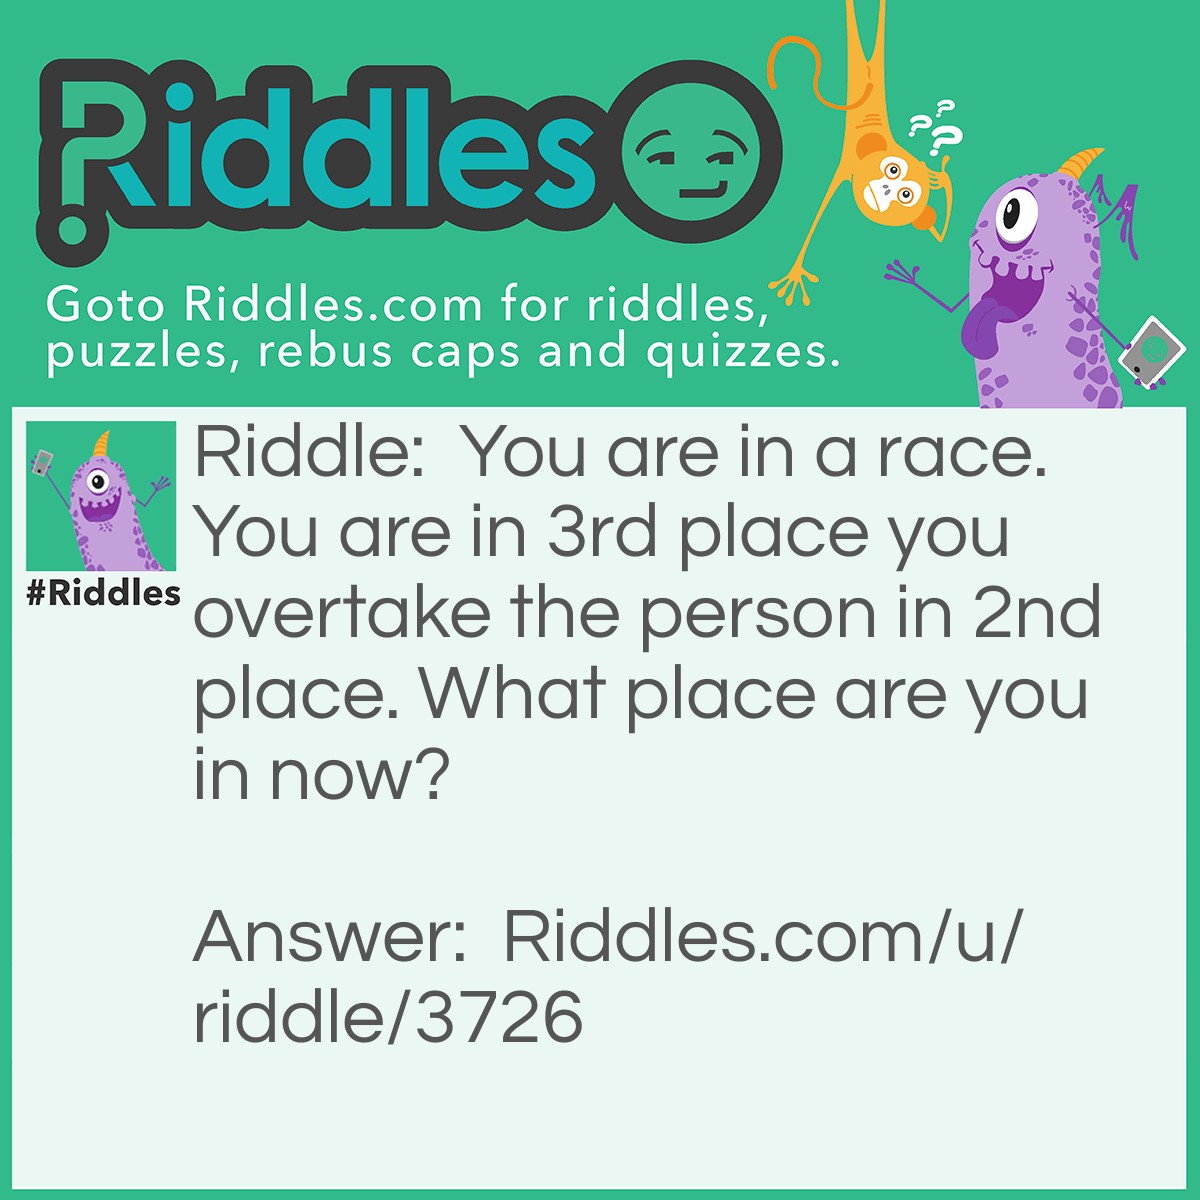 Riddle: You are in a race. You are in 3rd place you overtake the person in 2nd place. What place are you in now? Answer: 1st place? Wrong. You are now in 2nd place.